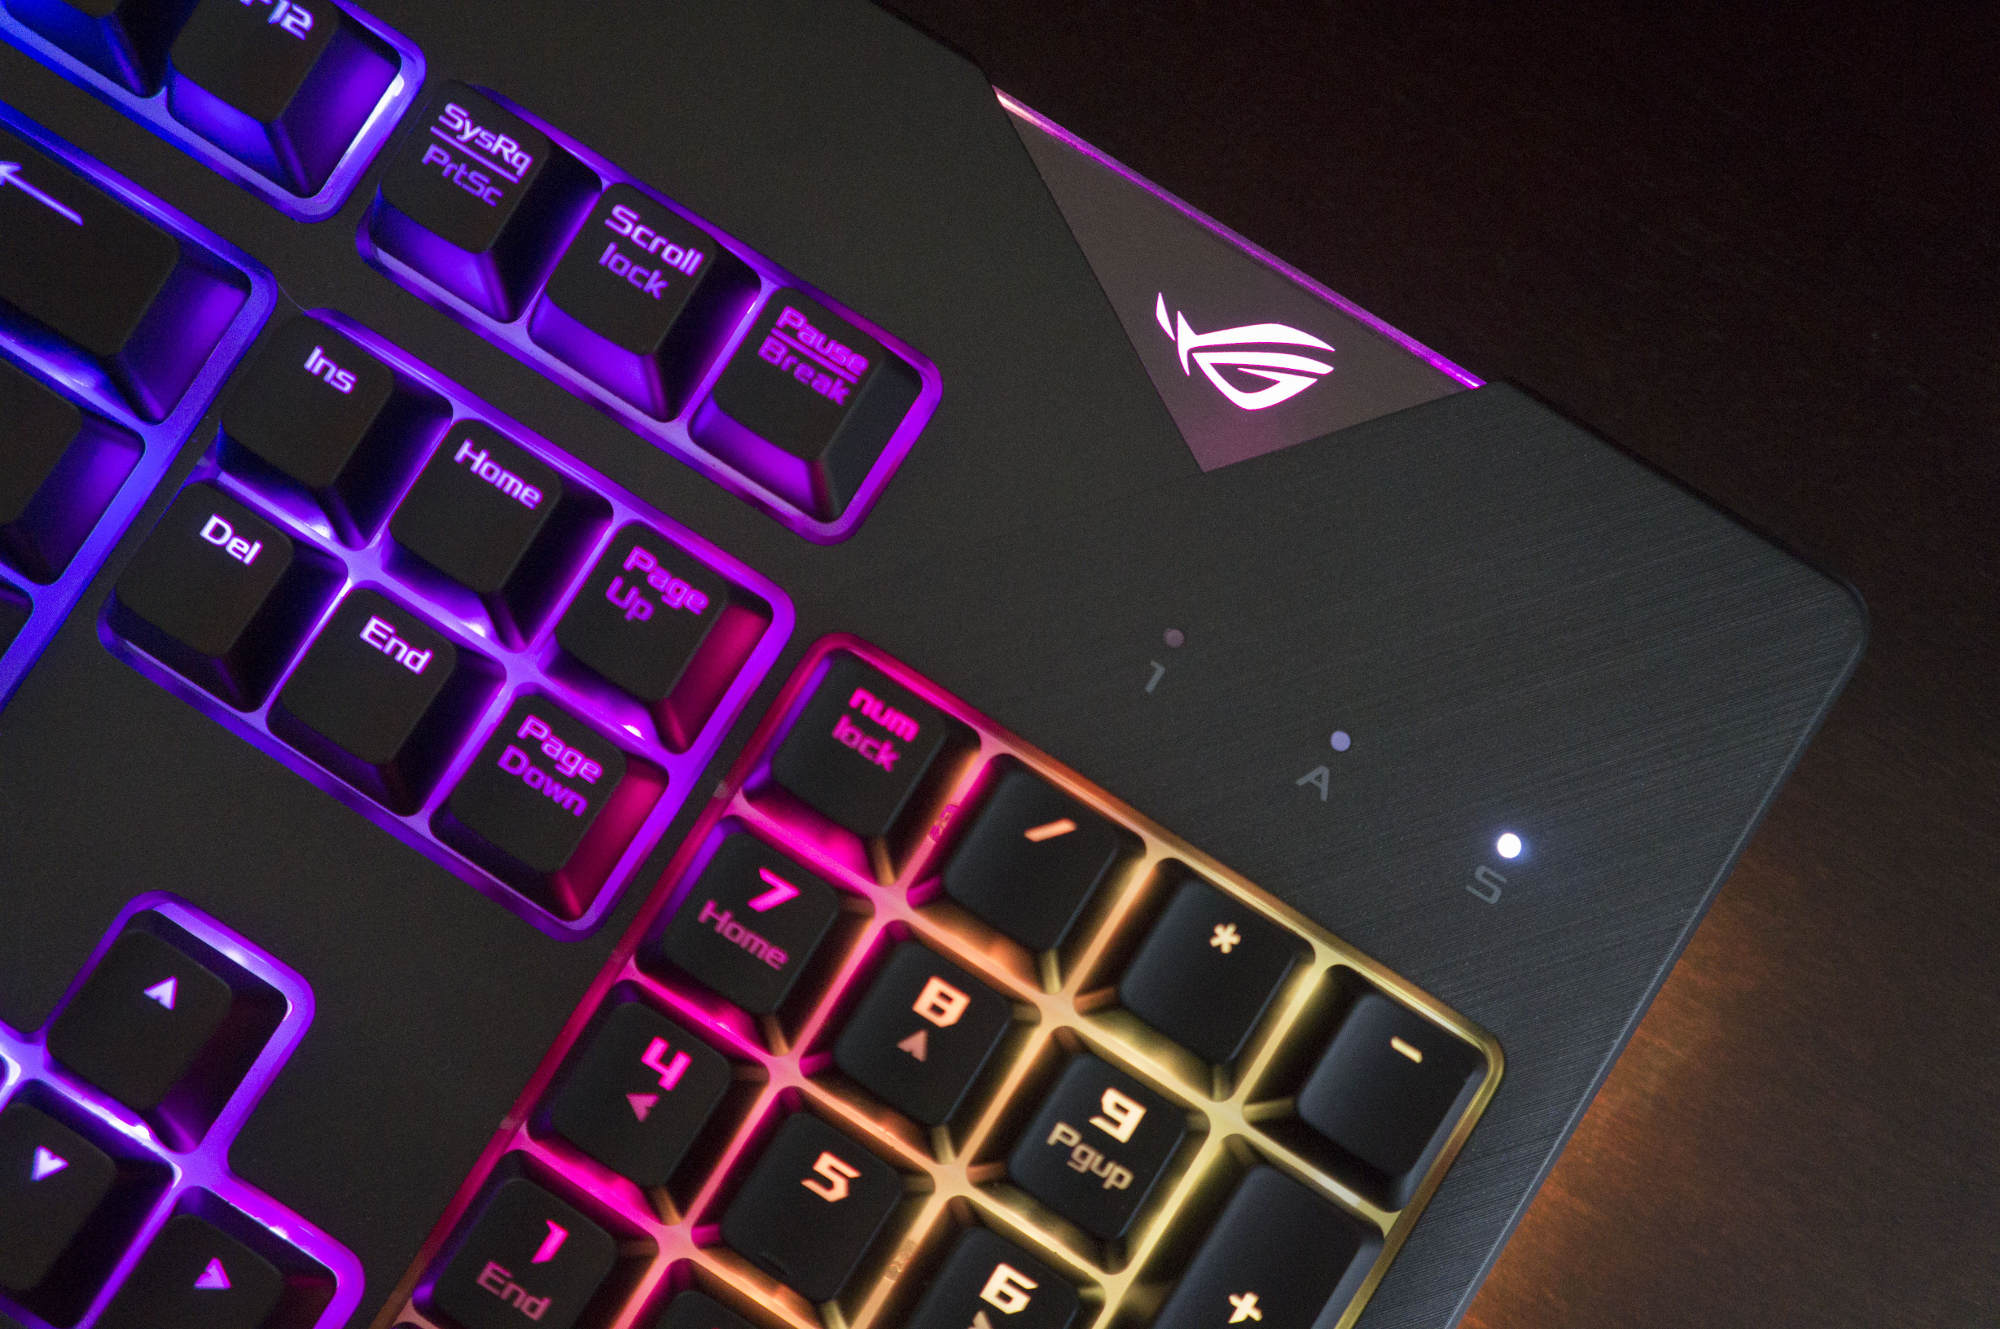 The Rog Strix Flare Is A Customizable Keyboard That You Can Personalize At Home Rog Republic Of Gamers Global